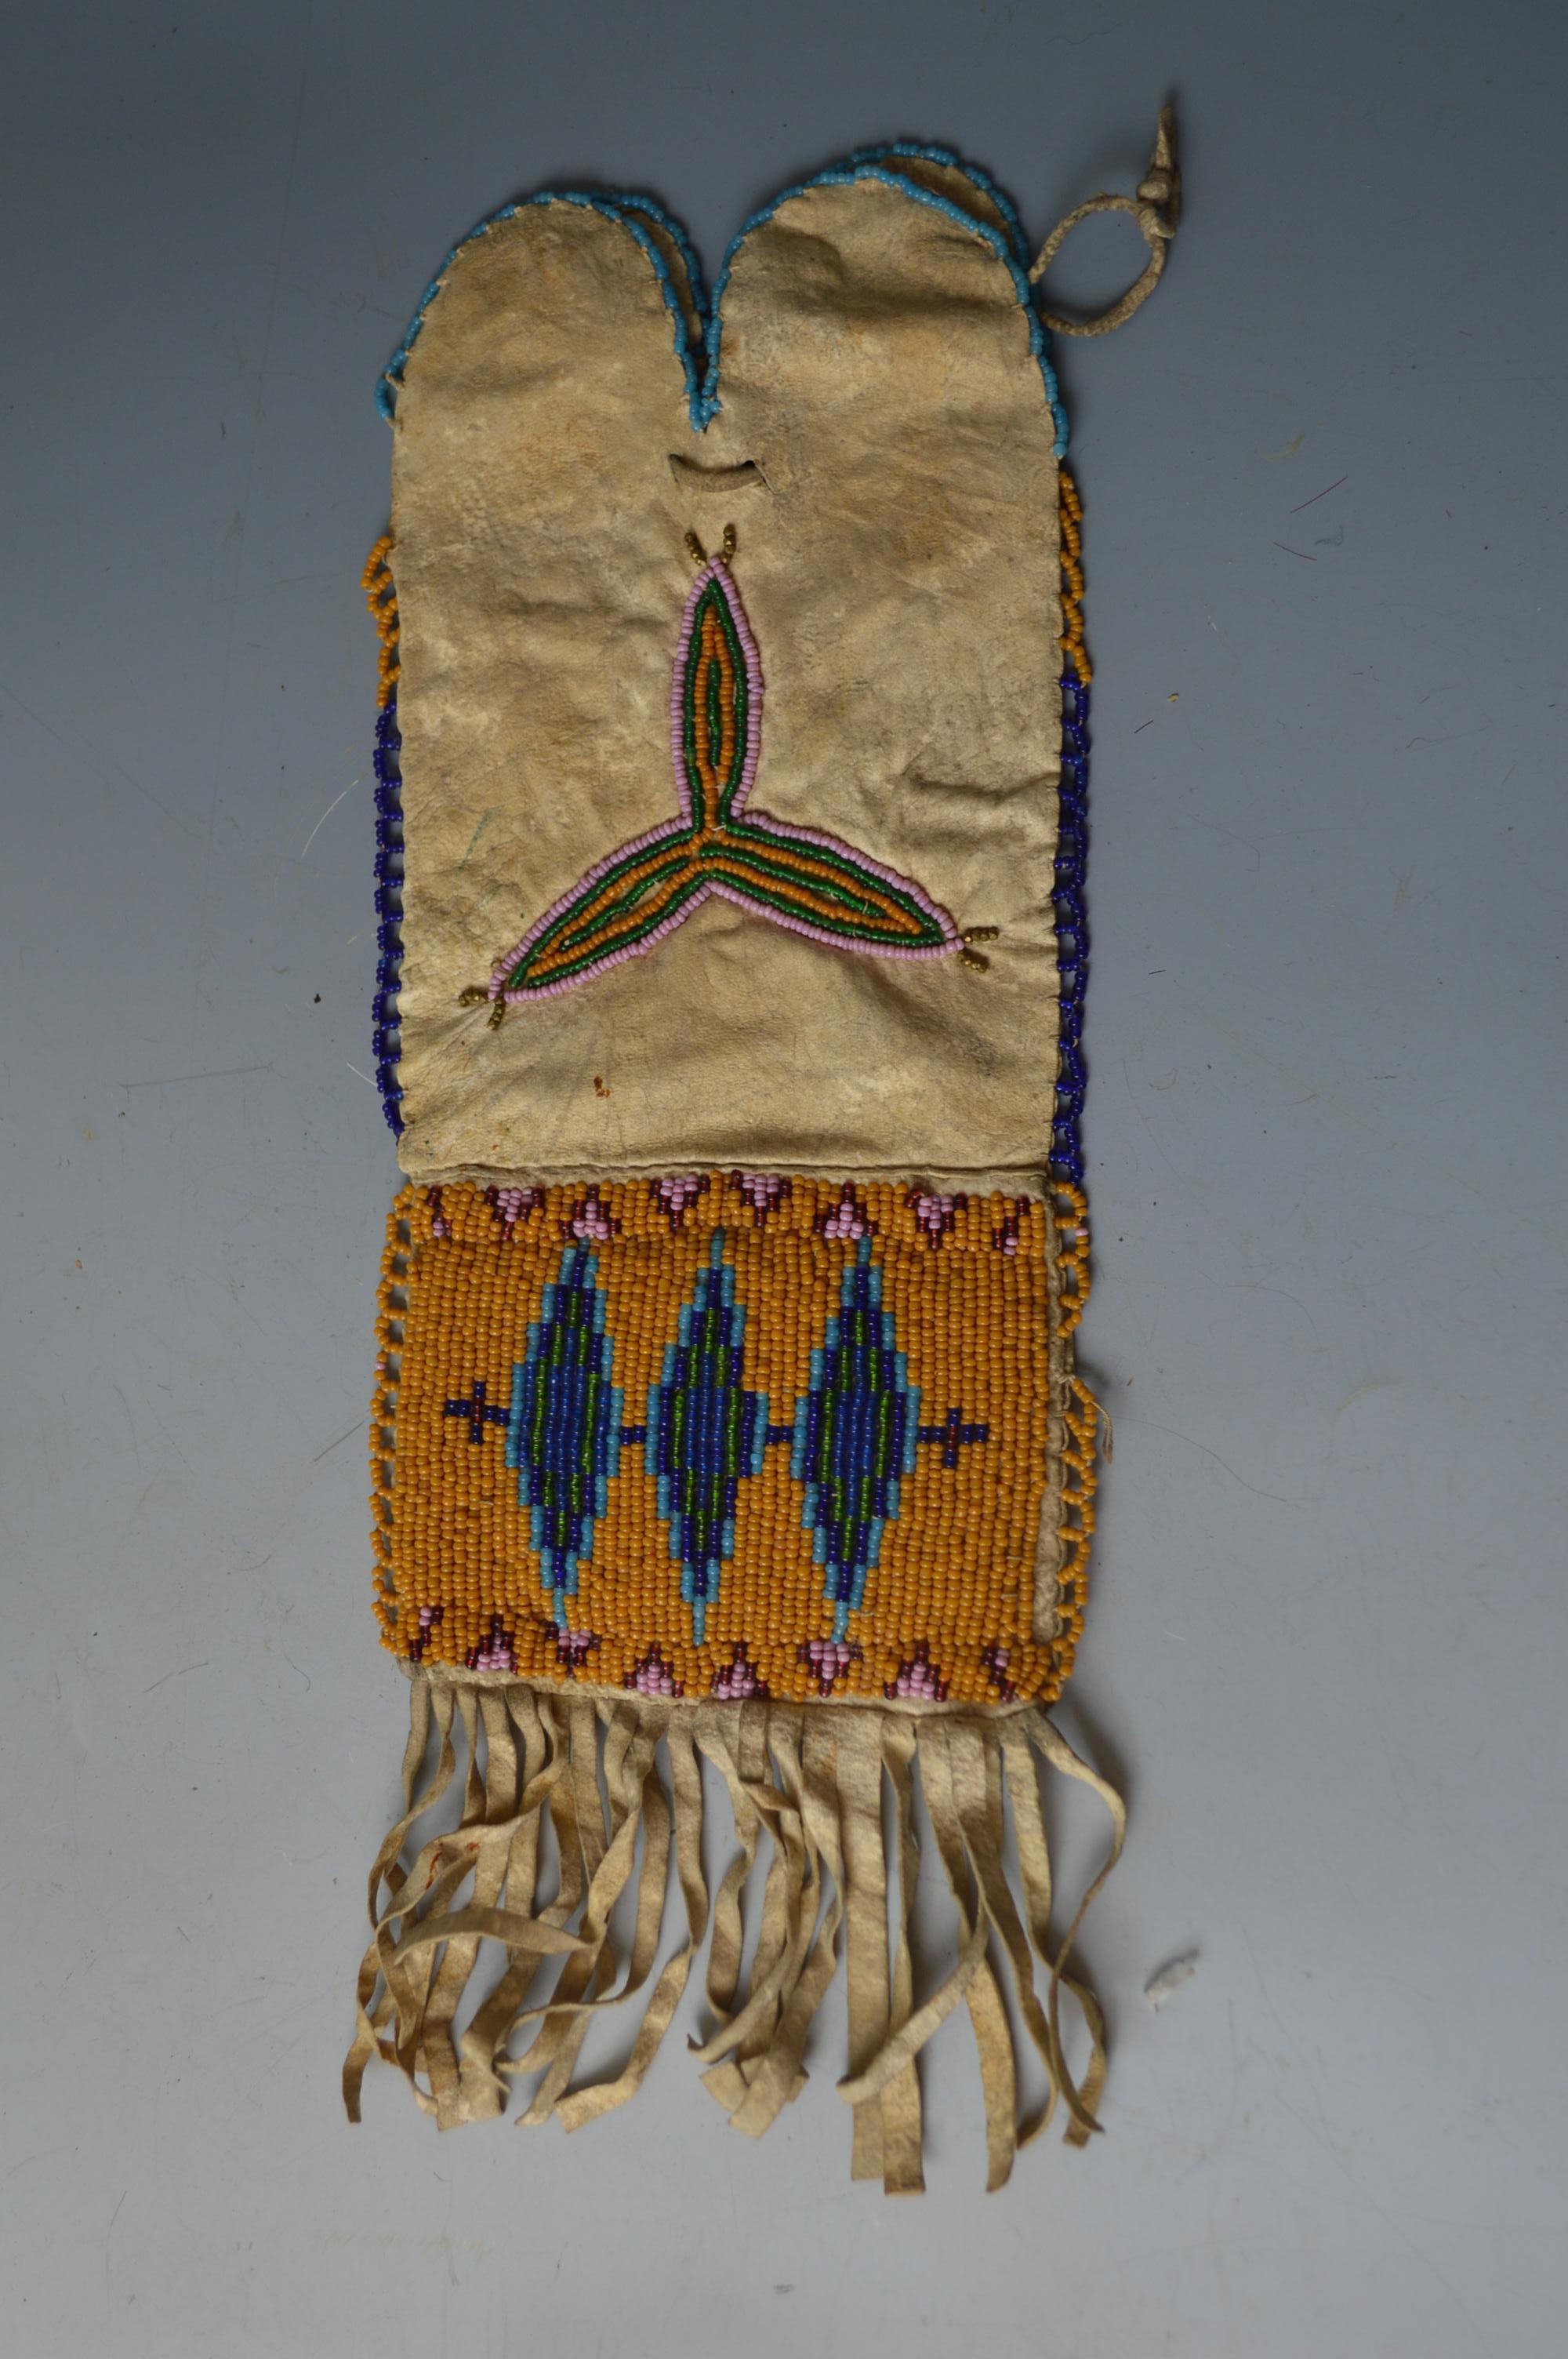 Fine rare old native American beaded pipe or tobacco bag
Buckskin, finely beaded on the both sides with glass beads in floral and geometric designs,
Possibly Apache or Plateau
Measures: Height 30 cm
Period: Late 19th century-early 20th